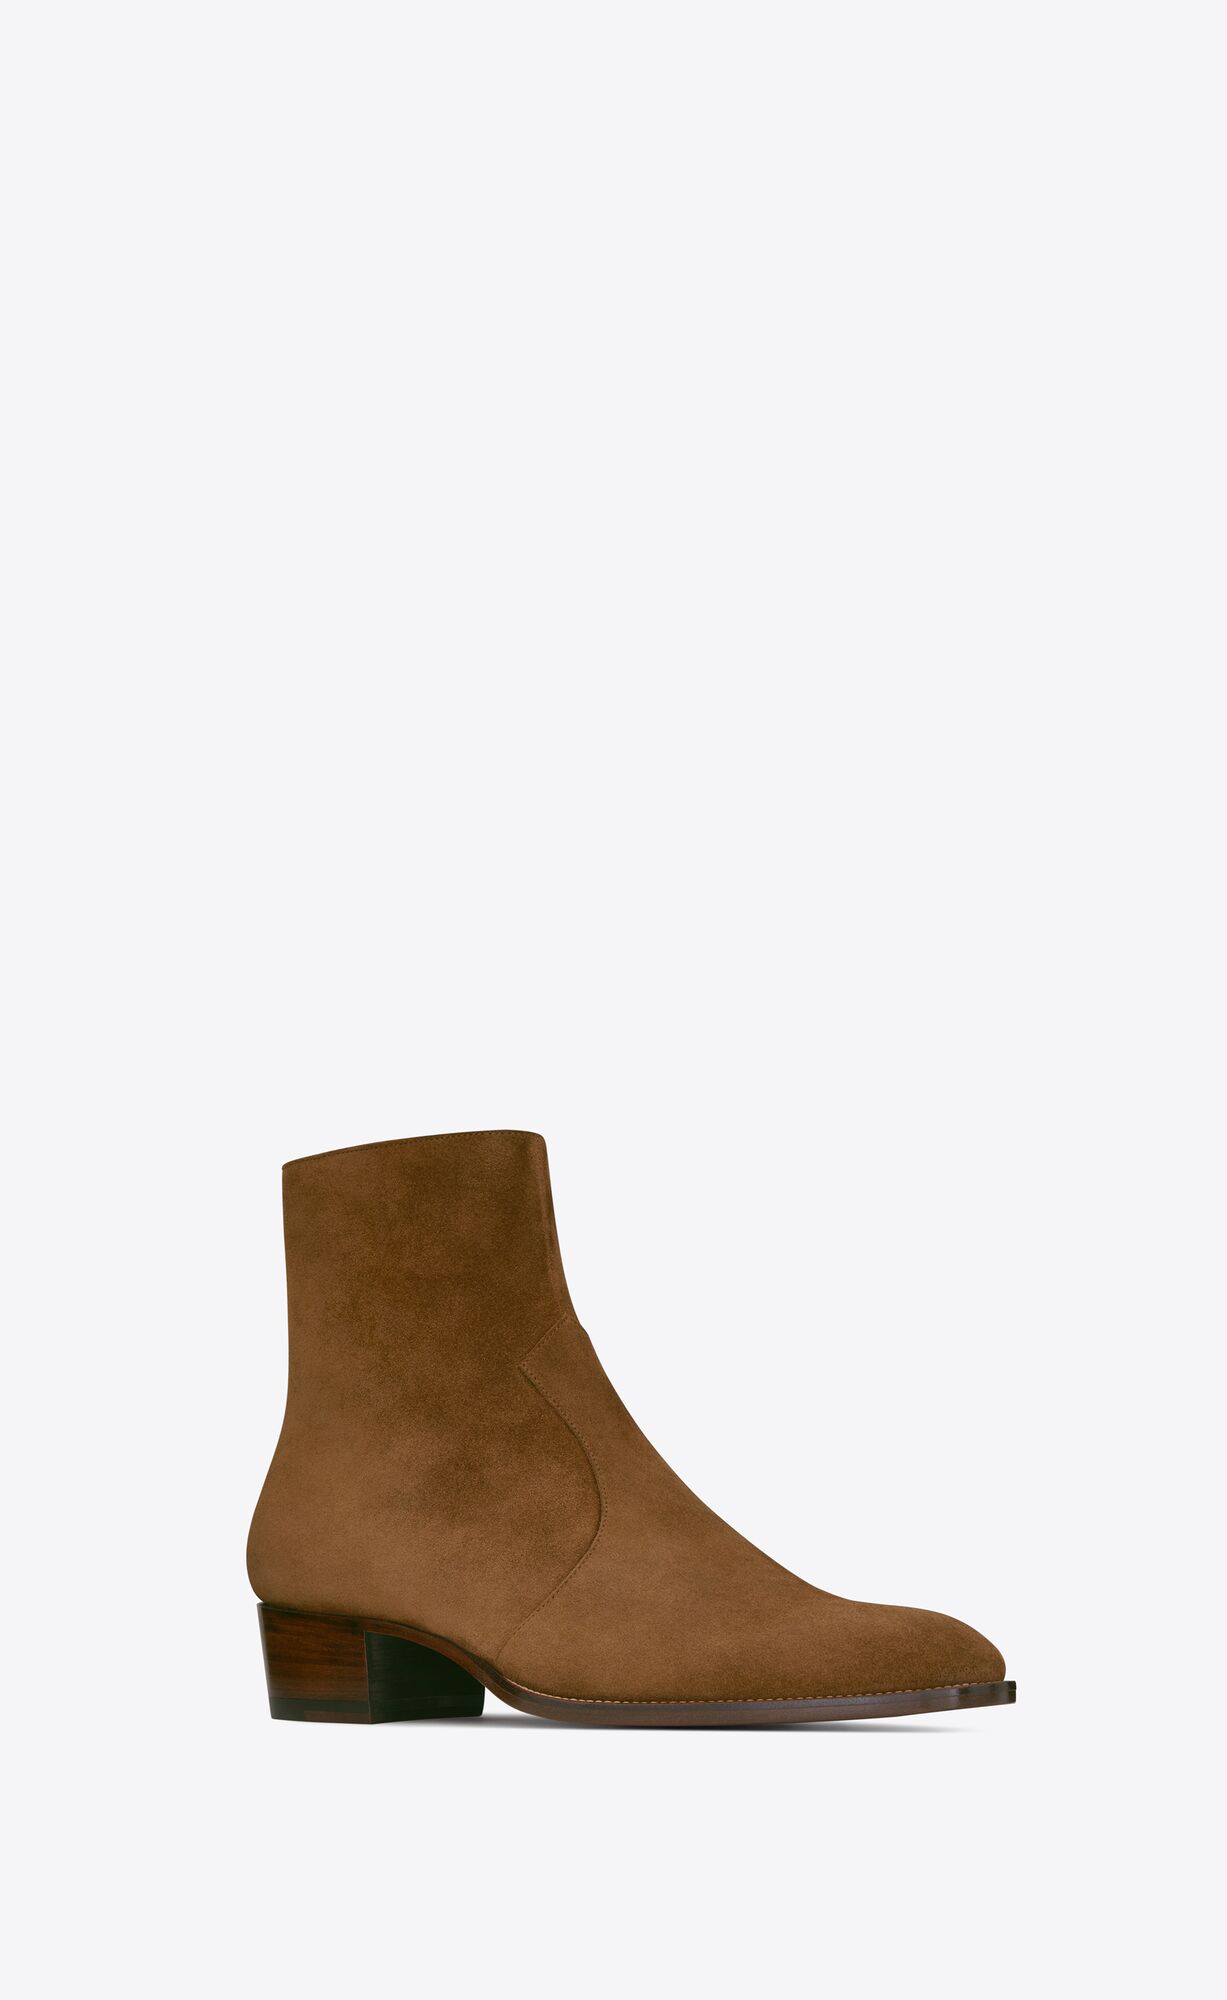 WYATT zipped boots in suede | Saint Laurent United States | YSL.com